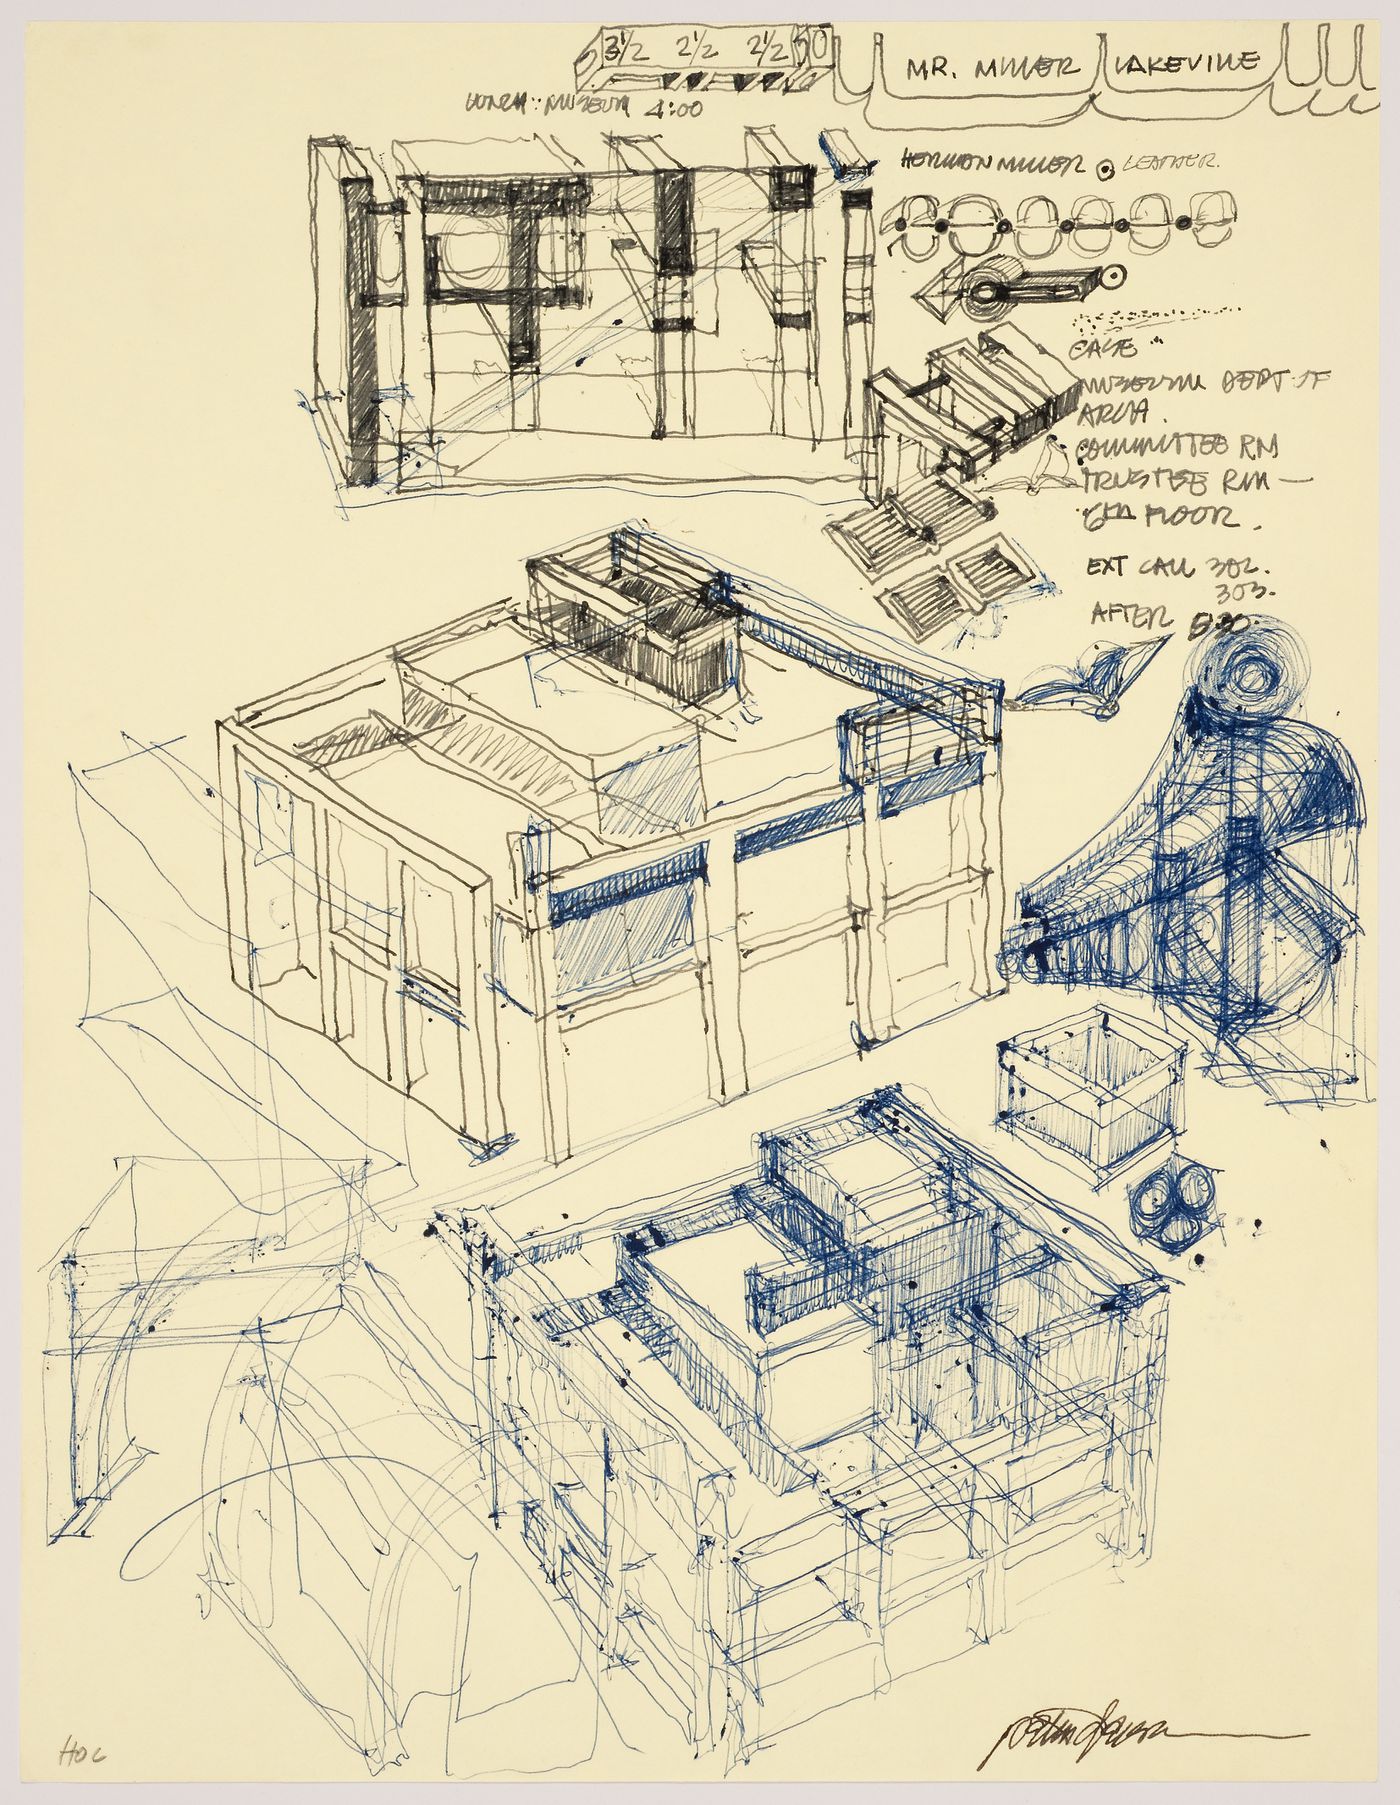 Conceptual sketches for Falk House (House II), Hardwick, Vermont